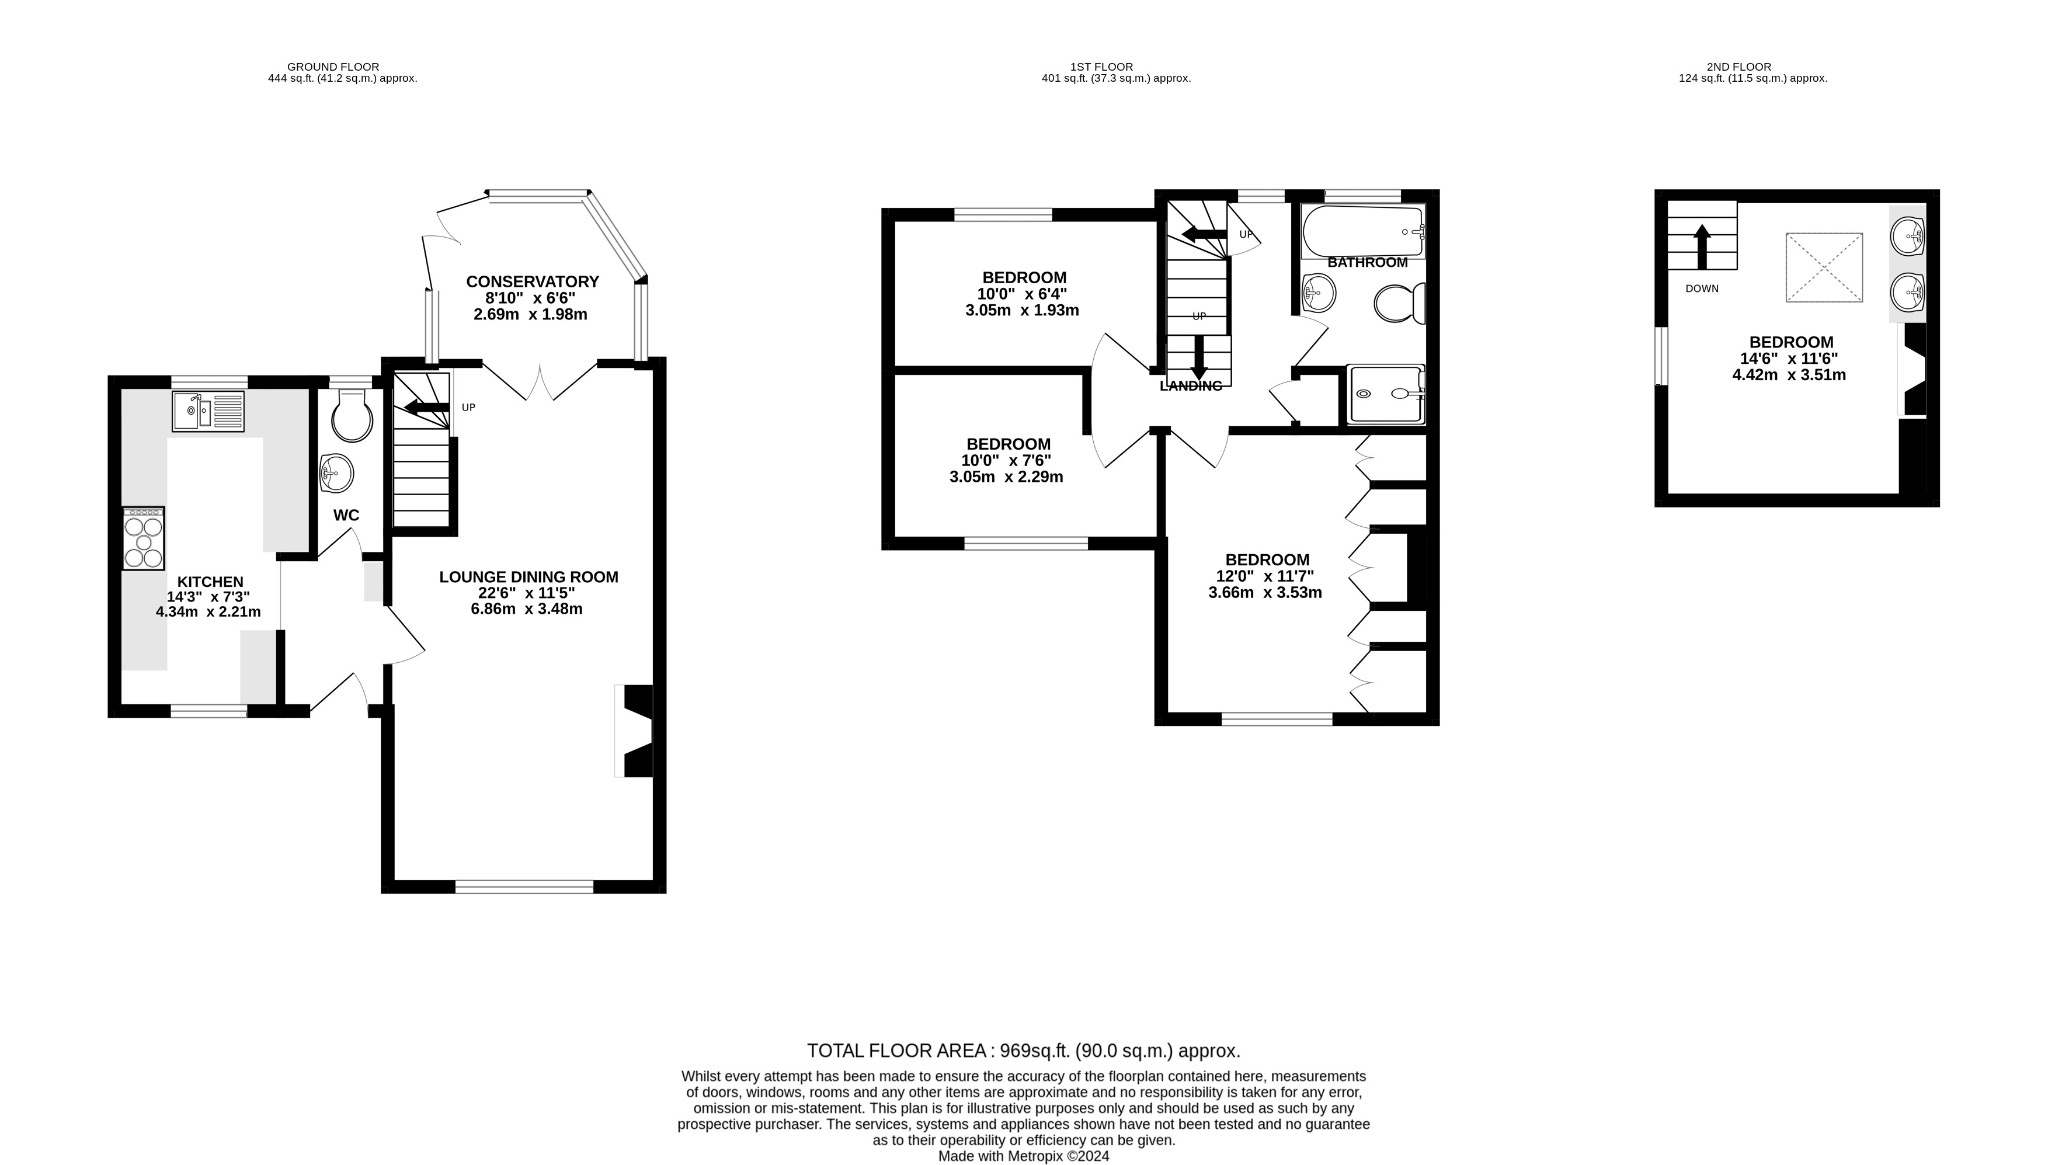 4 bed semi-detached house for sale in Penn - Property floorplan